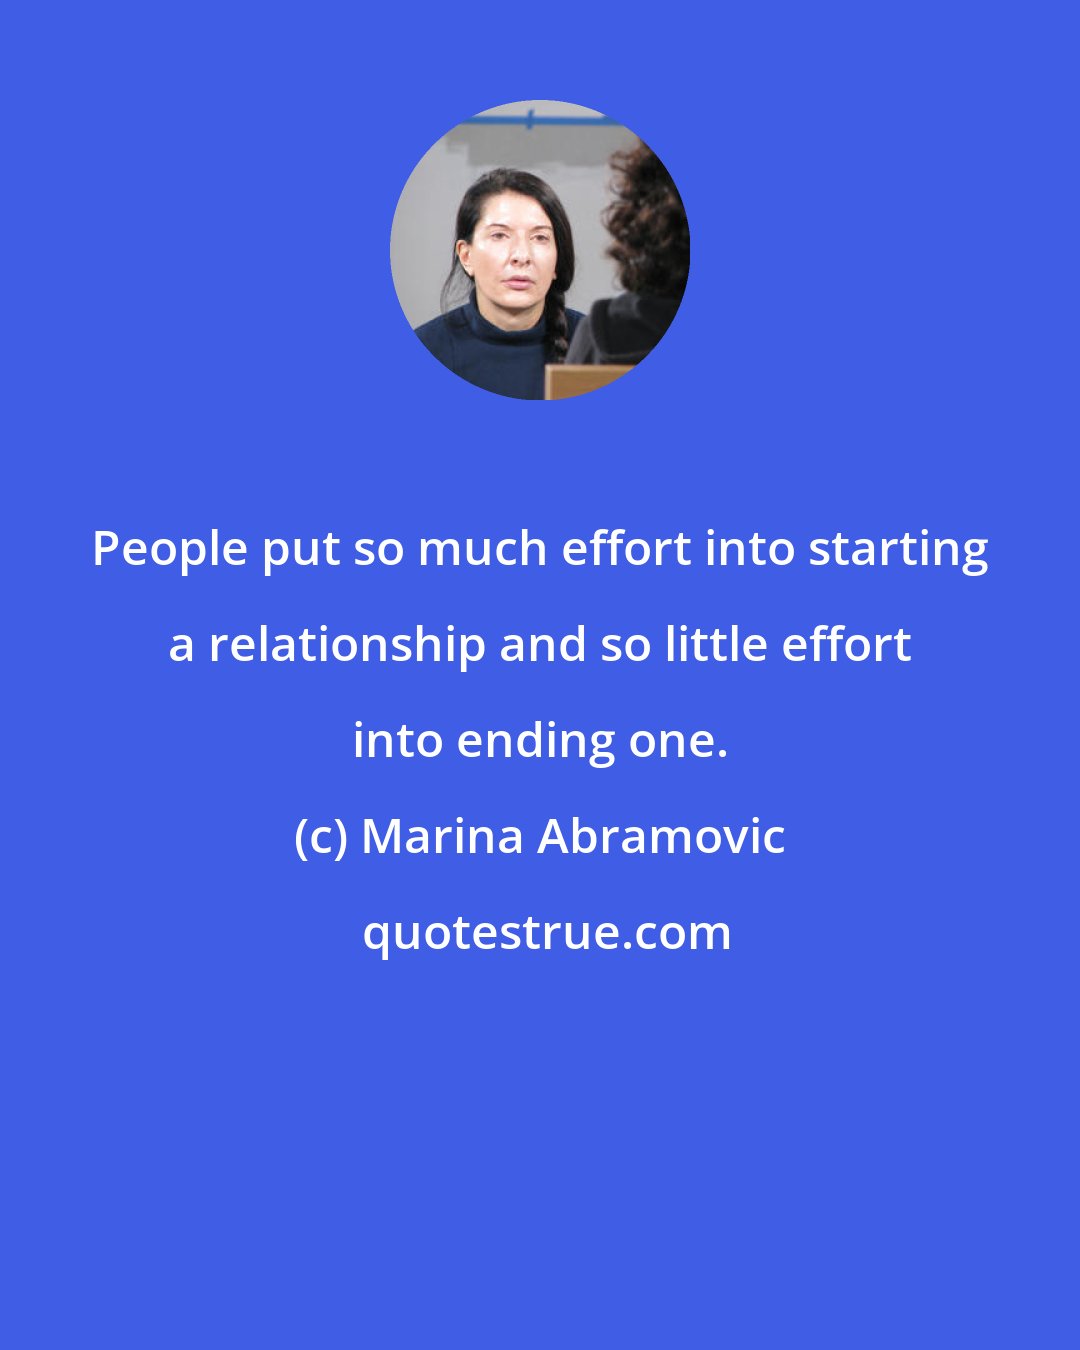 Marina Abramovic: People put so much effort into starting a relationship and so little effort into ending one.